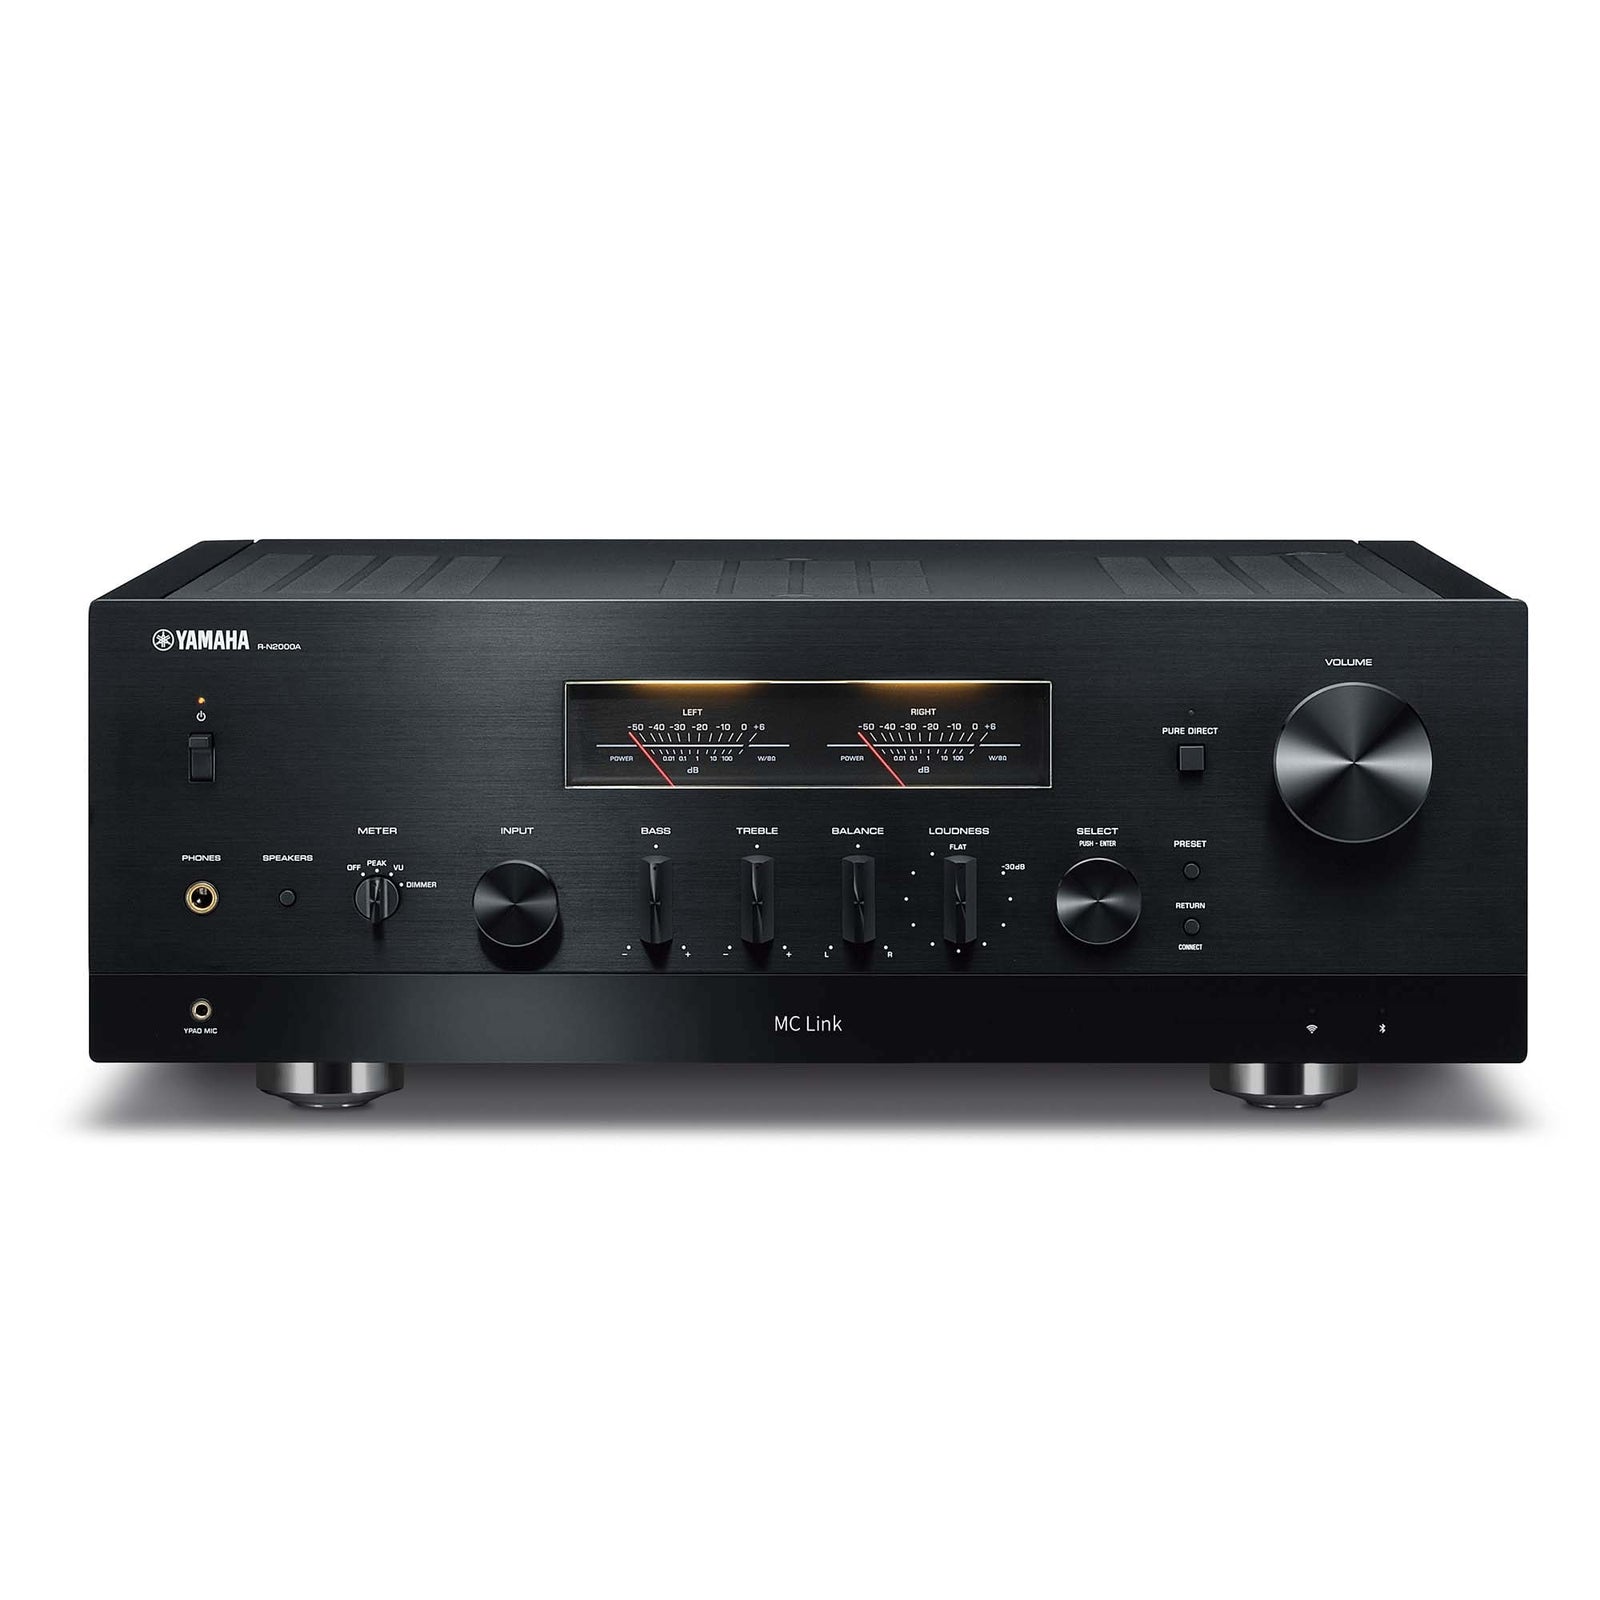 YAMAHA R-N2000A - 2CH RECEIVERS | VINYL SOUND Yamaha R-N2000A - 2ch Receivers with its authentic Hi-Fi quality, the Yamaha R-N2000A is a next-generation Network HiFi Receiver, compatible with lossless and high-resolution music sources, including streaming services. It offers effortless ideal room acoustic adjustment (YPAO™) YPAO™-R.S.C.